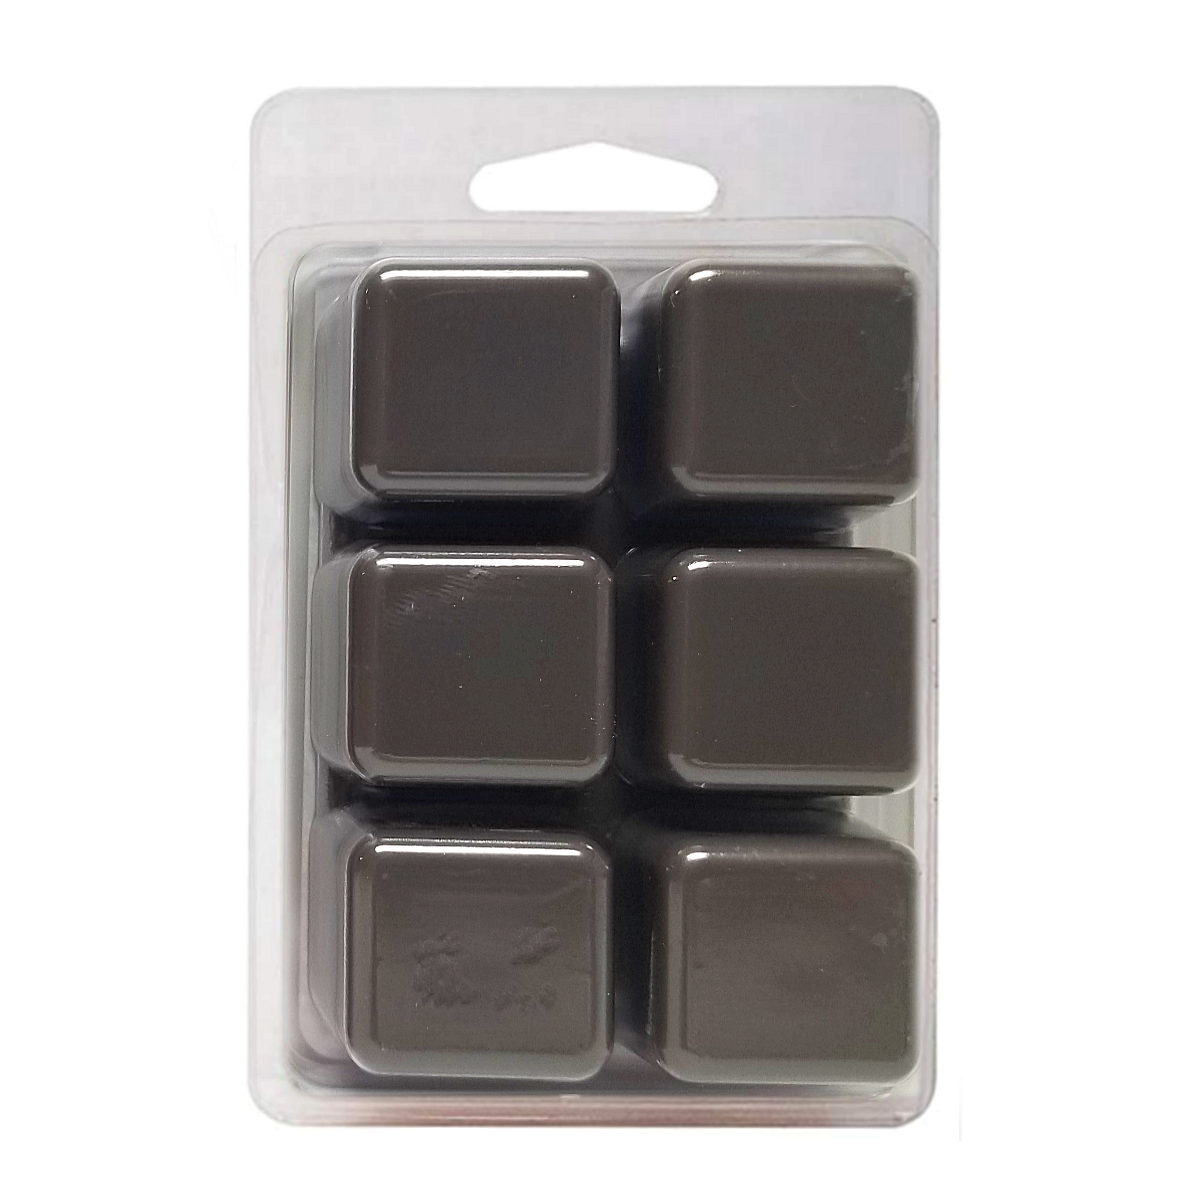 Oreo Cookie - 3.2 oz Clamshell